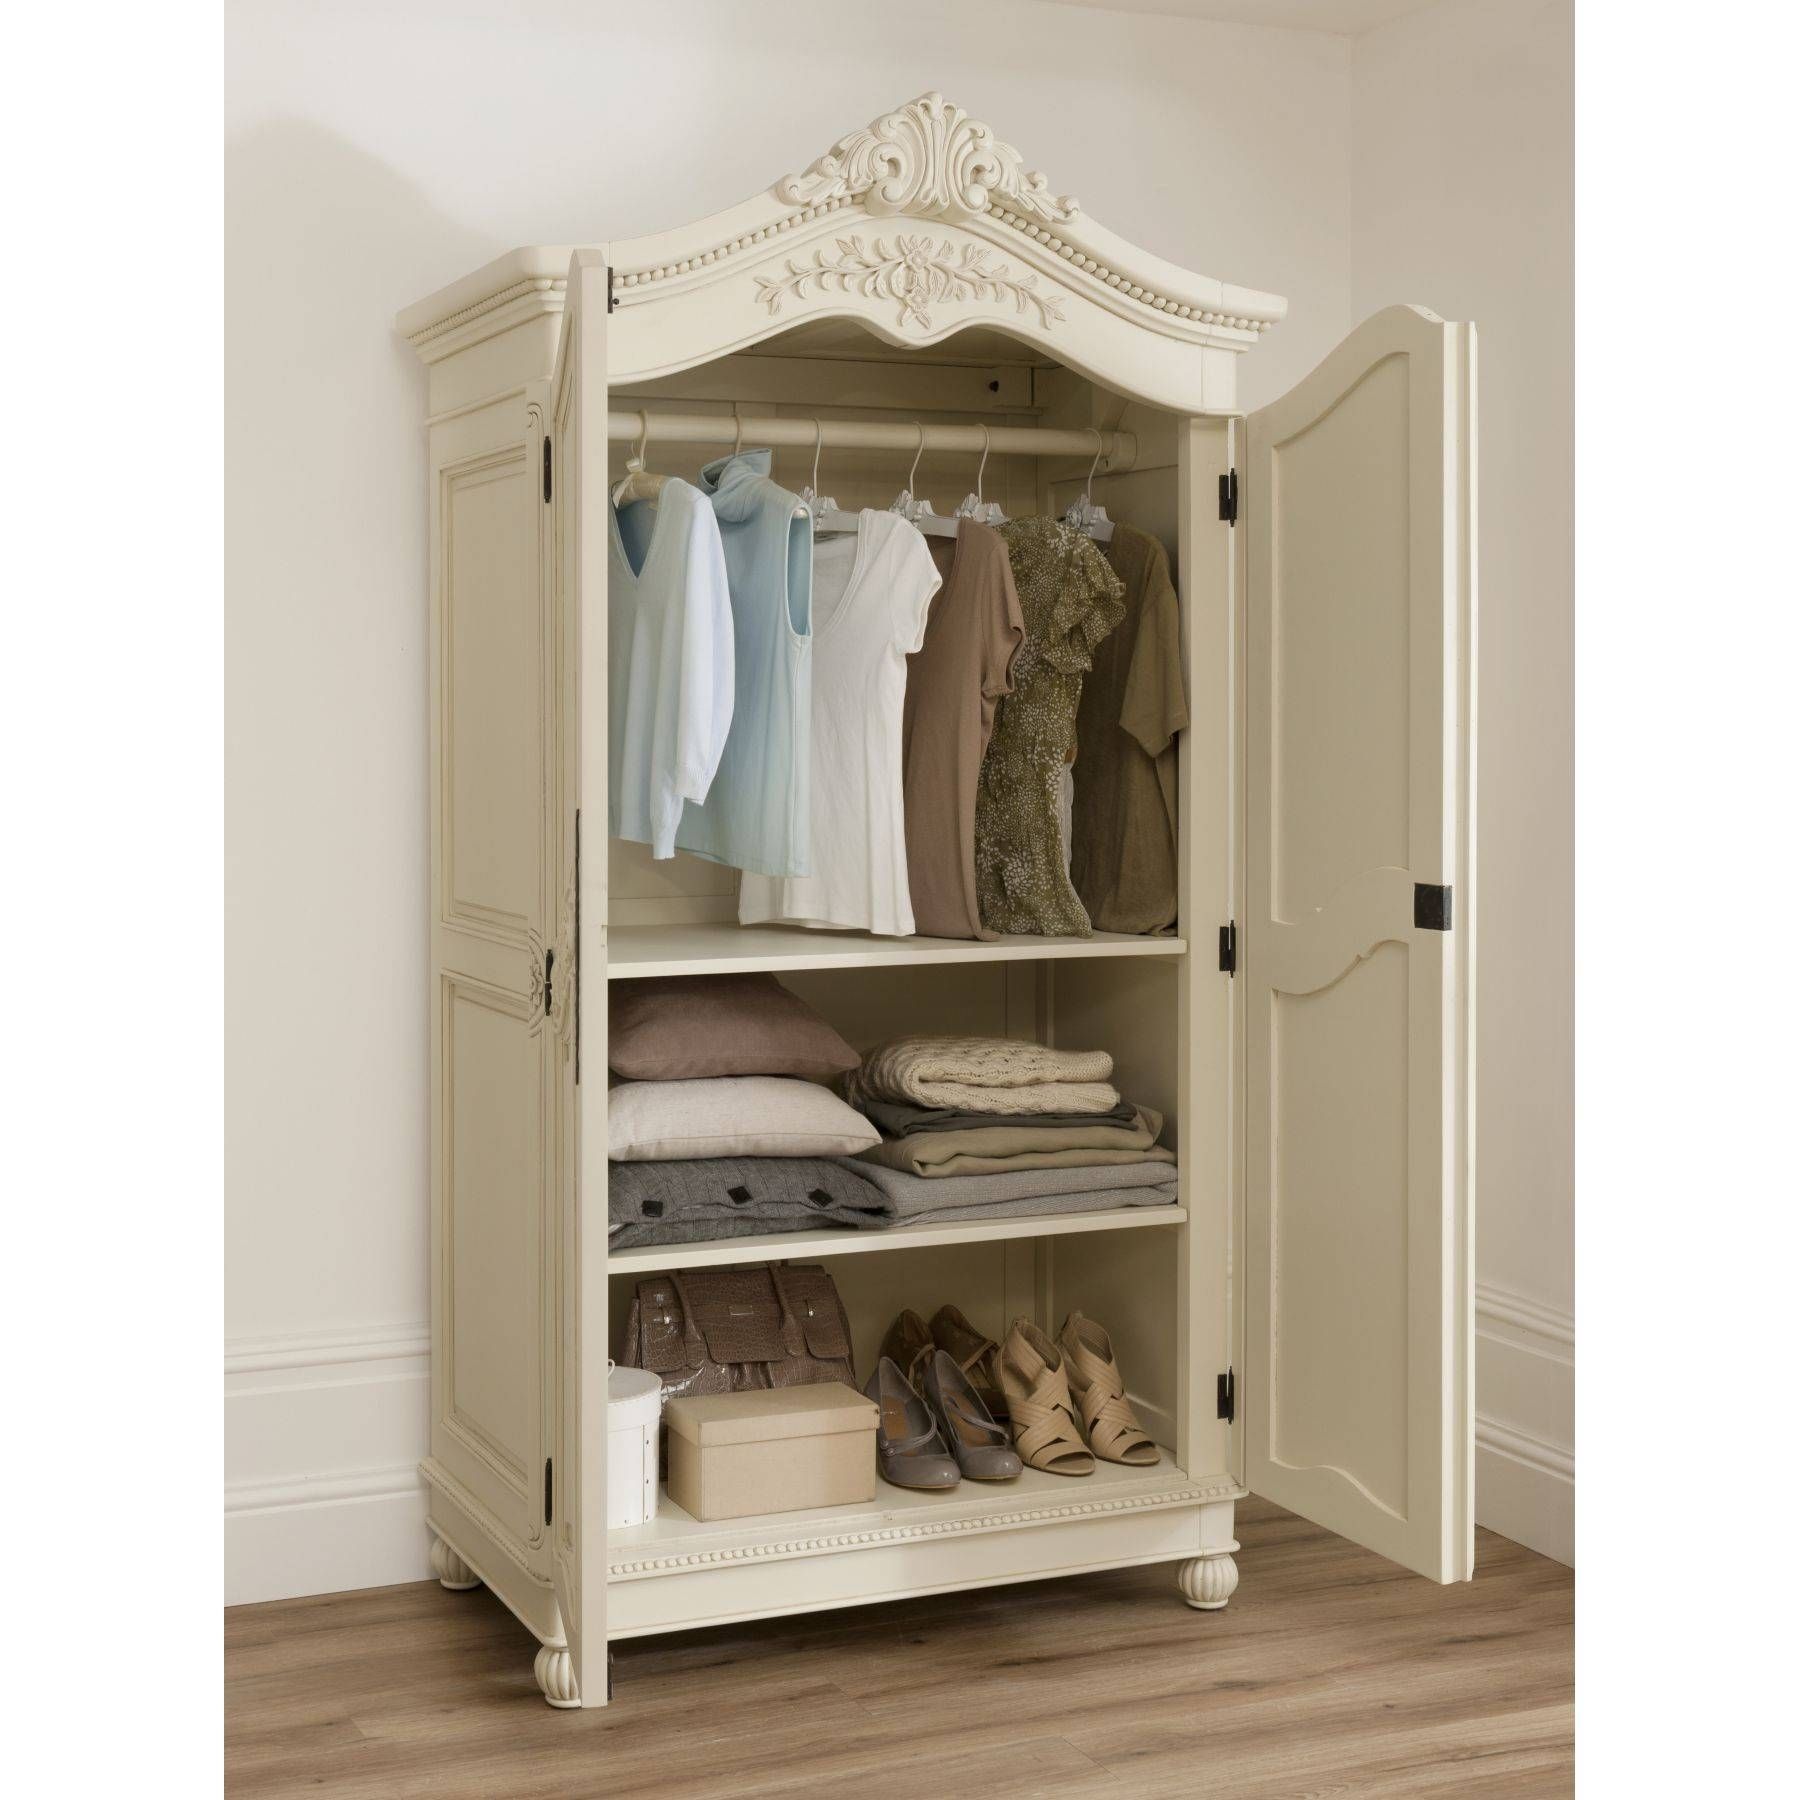 Bordeaux Ivory Shabby Chic Wardrobe | Shabby Chic Furniture Throughout Bordeaux Wardrobes (View 4 of 15)